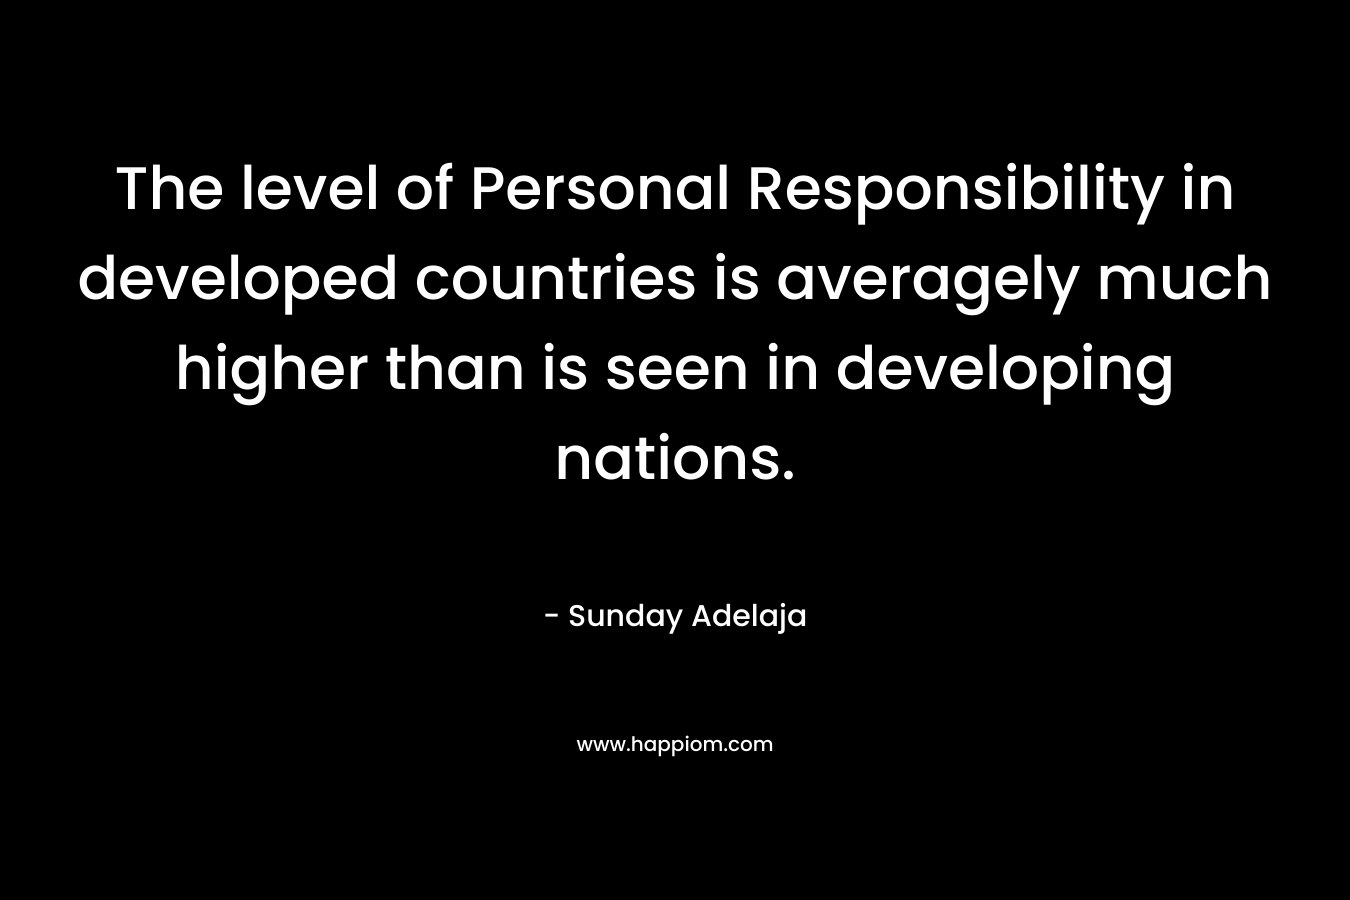 The level of Personal Responsibility in developed countries is averagely much higher than is seen in developing nations. – Sunday Adelaja